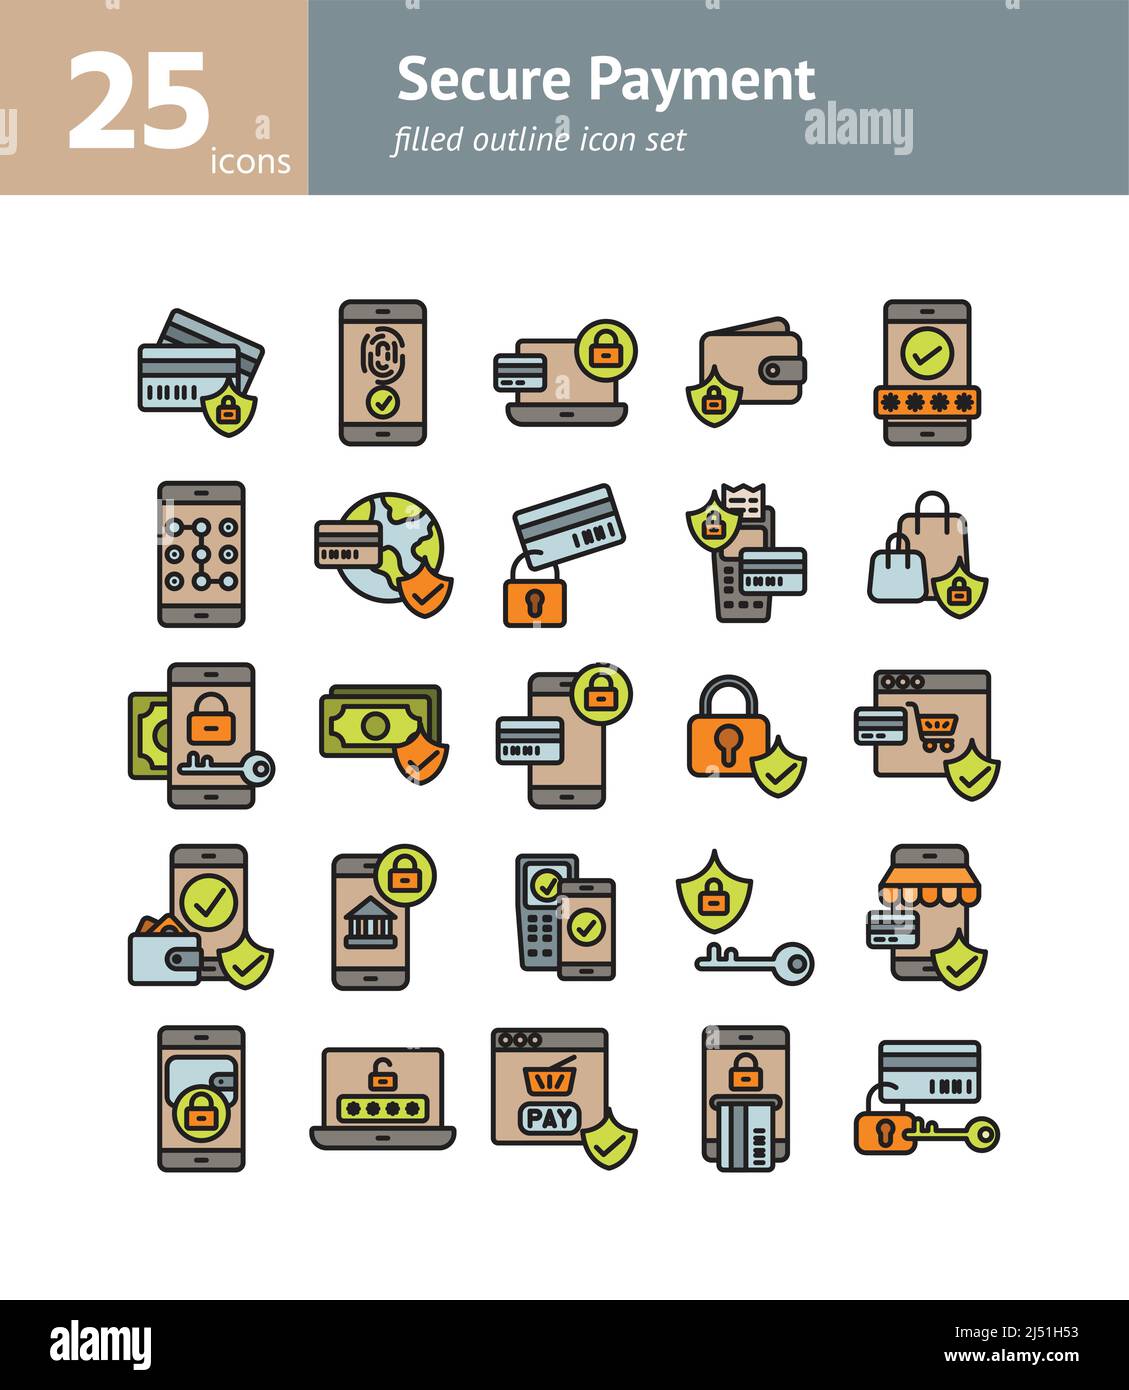 Secure Payment filled outline icon set. Vector and Illustration. Stock Vector